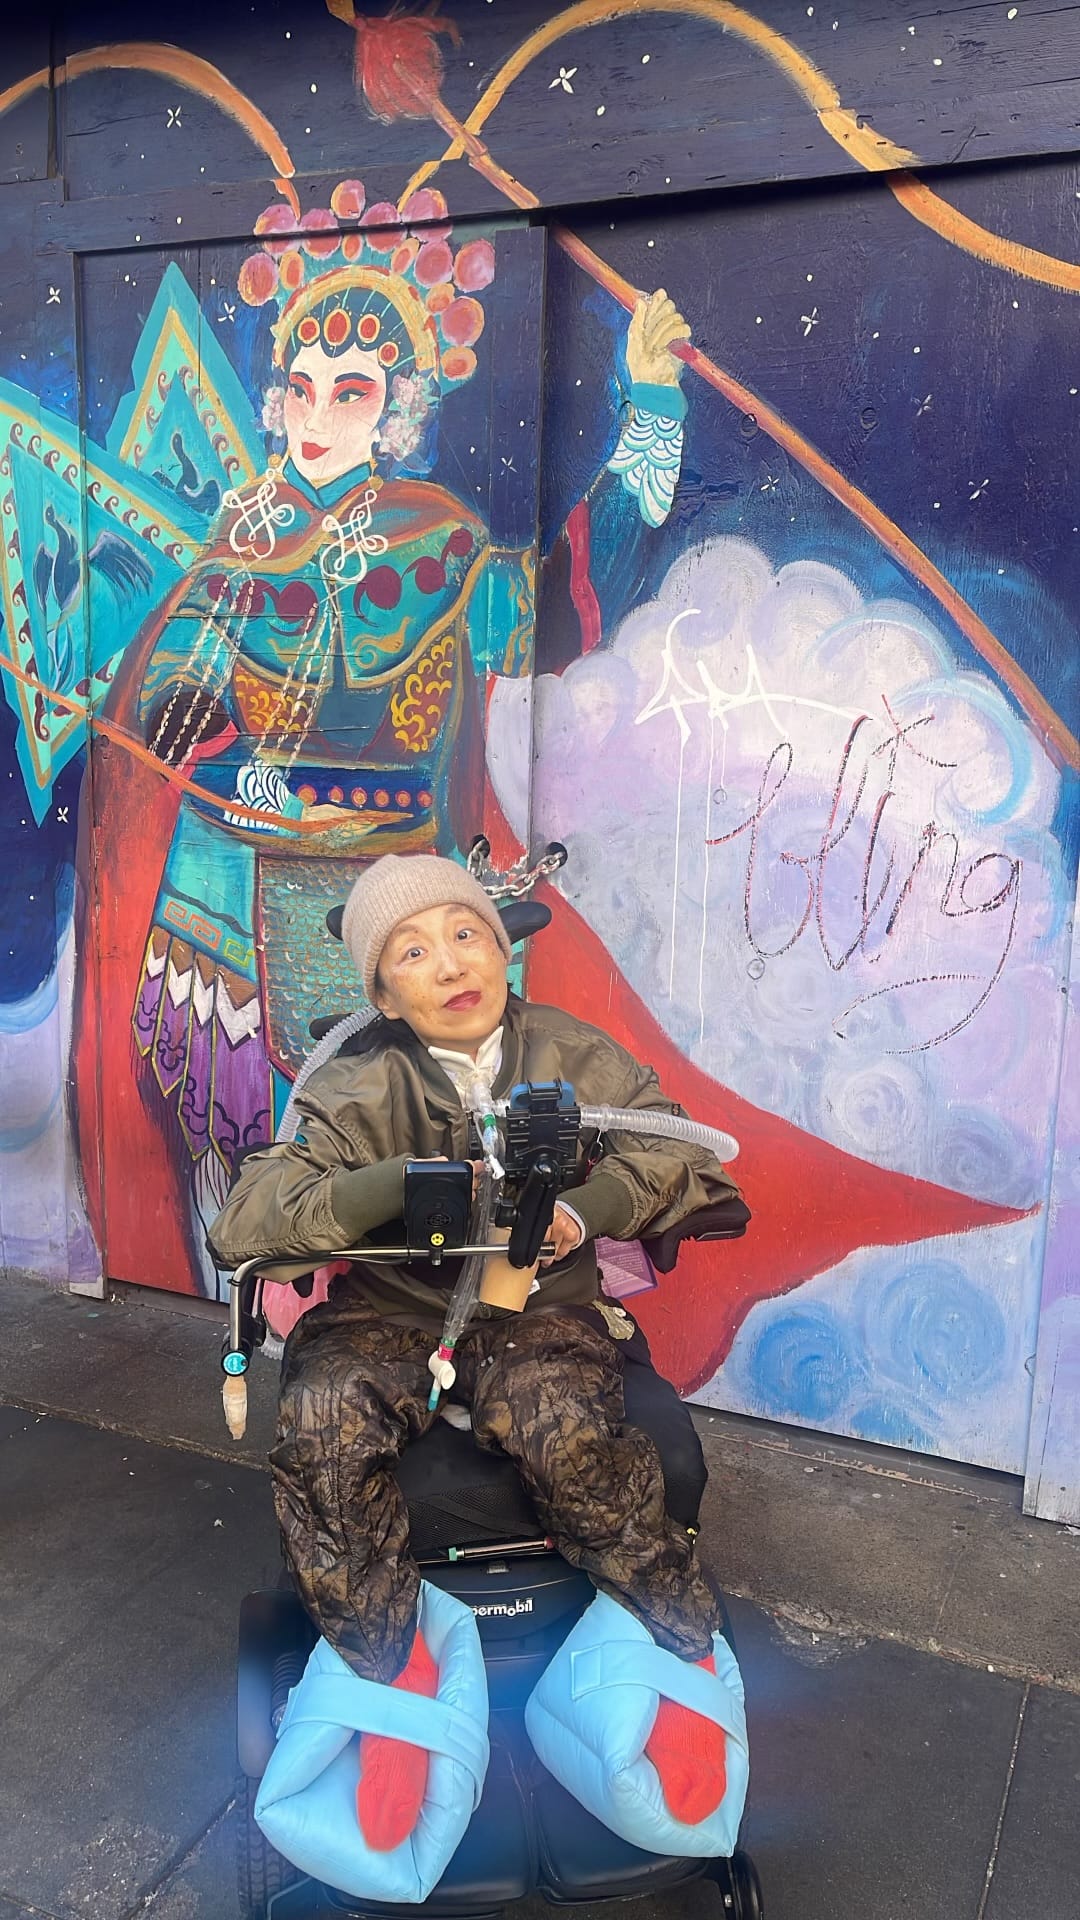 a photo of me, an Asian American woman in a wheelchair with a tracheostomy and a tube attached to a ventilator. I’m wearing a beanie, olive green jacket and camouflage pants. Behind me is a mural featuring a Chinese opera singer 